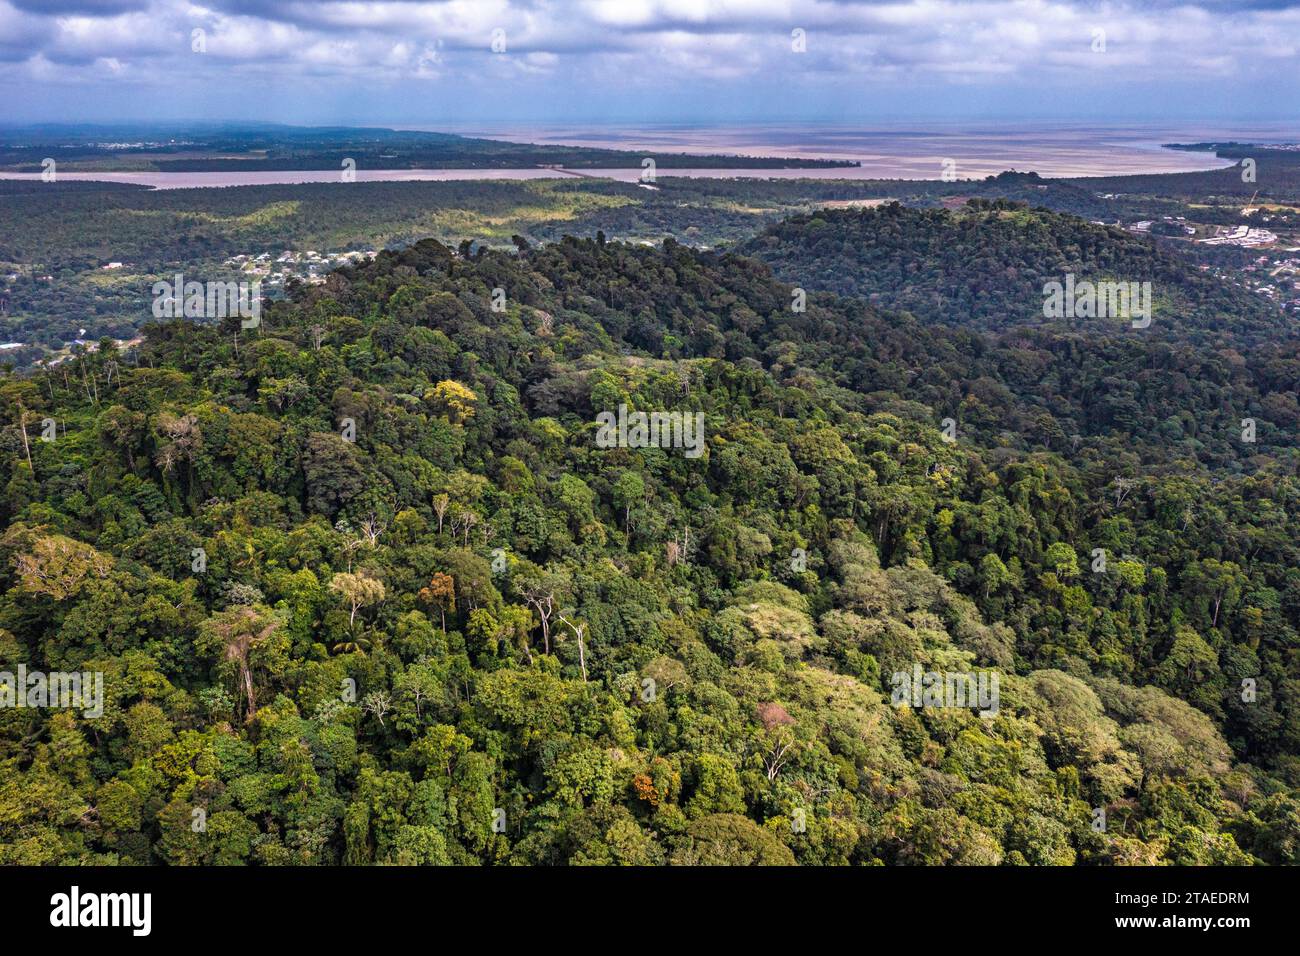 France, French Guiana, Matoury, Mont Grand Matoury Nature Reserve, hike on the Lamirande trail loop, aerial view of the Amazon canopy, the Mahury river and the Atlantic Ocean in the background (aerial view) Stock Photo